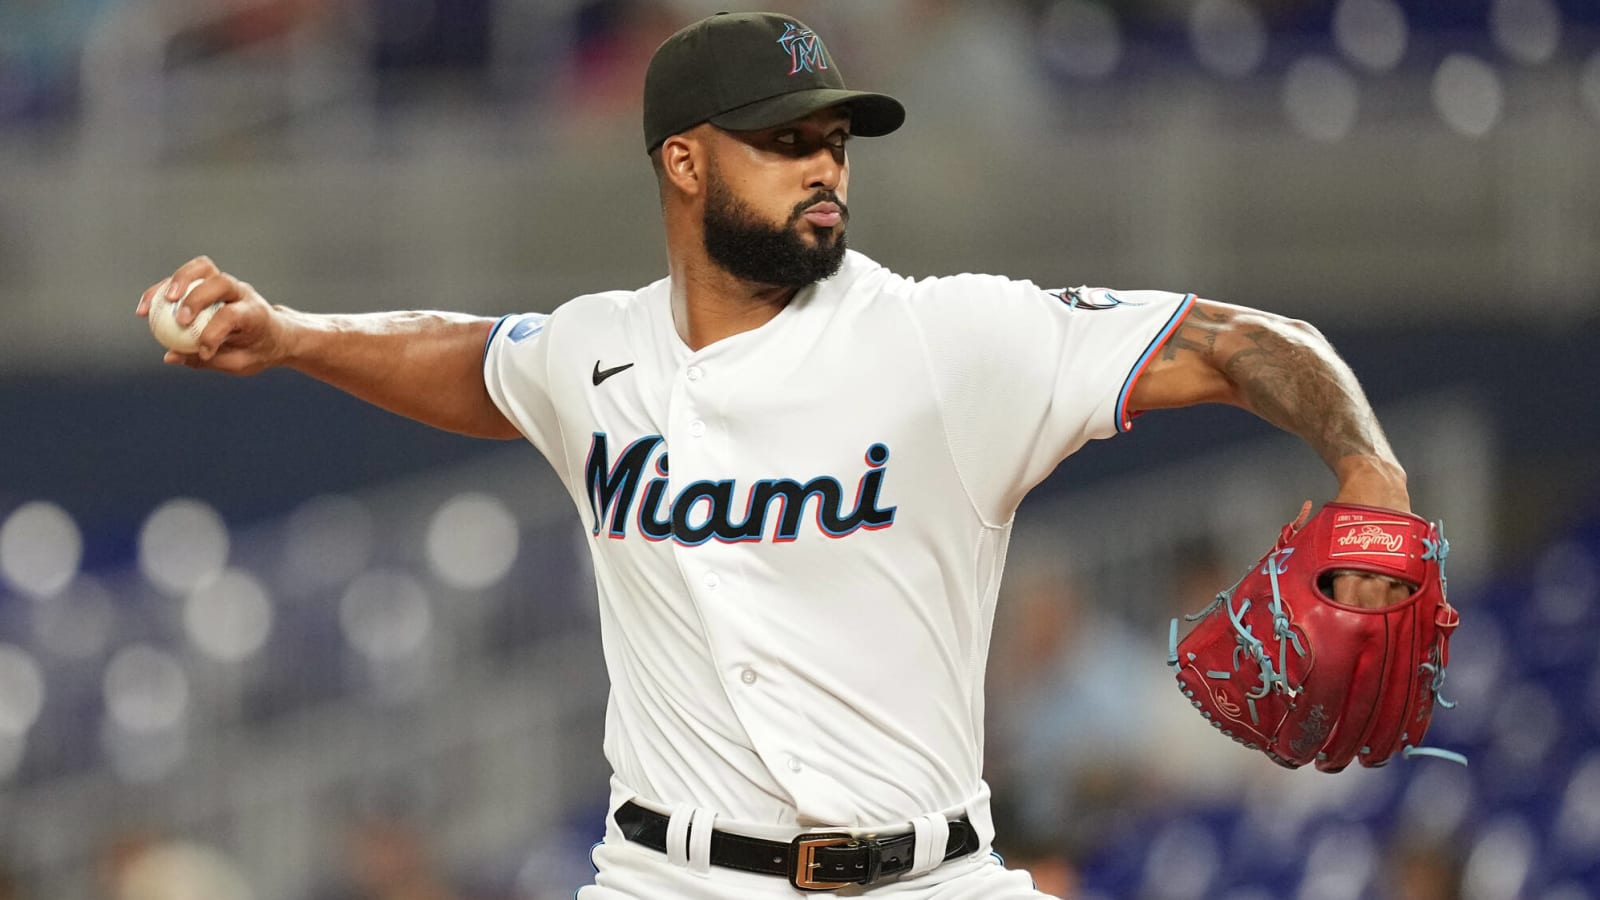 Injured Marlins ace is 'ahead of schedule' in Tommy John rehab